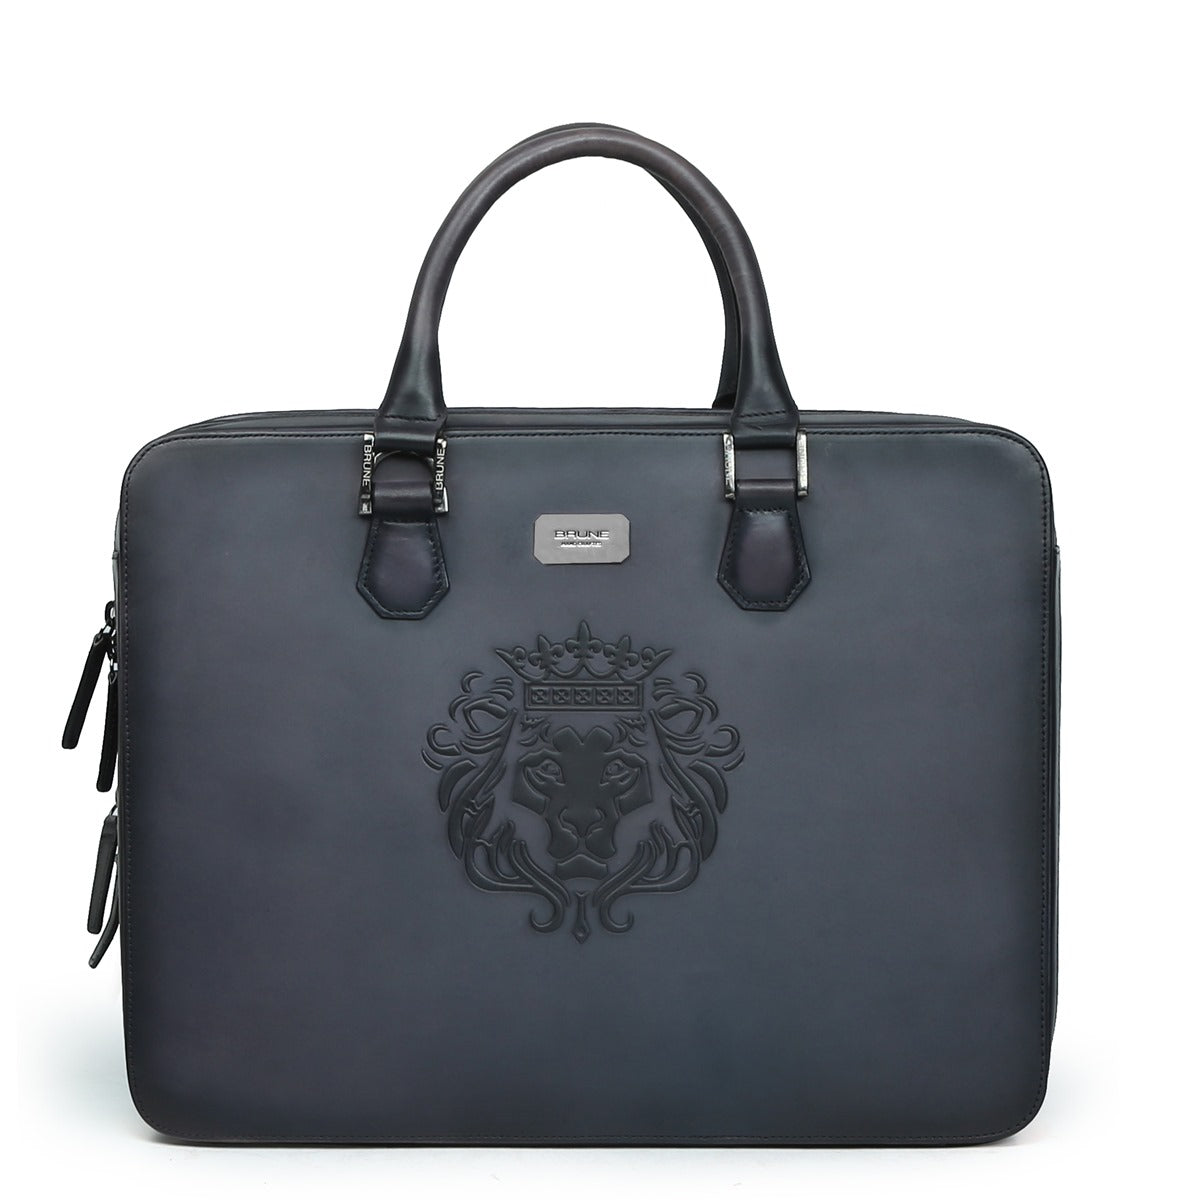 Grey Leather Embossed Lion Laptop Briefcase with Organizer Compartment by Brune & Bareskin